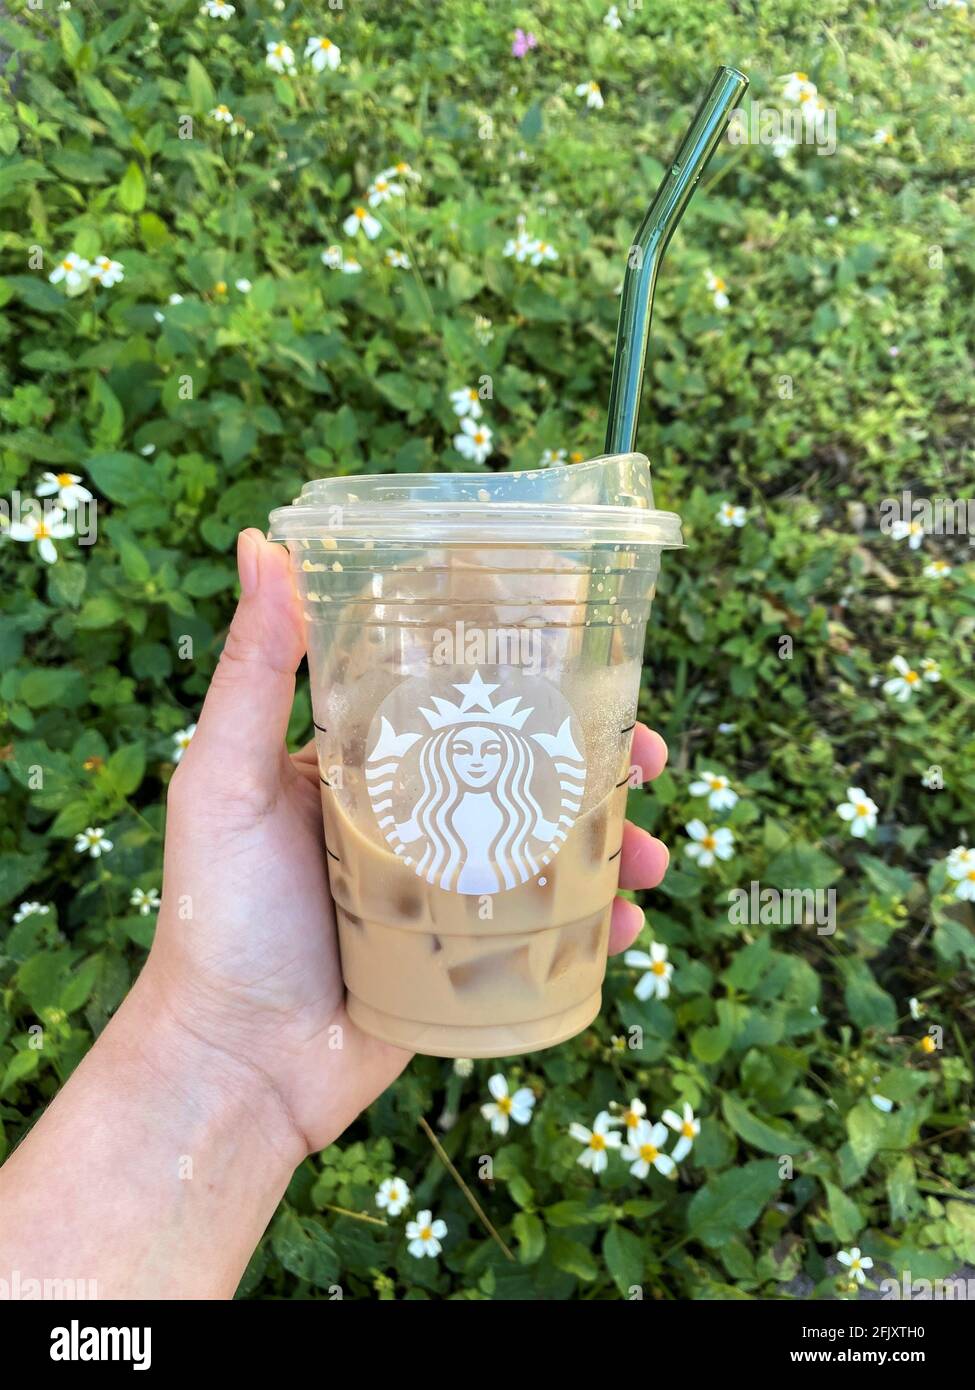 Holding a glass straw in a Starbucks coffee cup aimed to reduce the need of single use plastic straws by using reusable straws. Green grass background Stock Photo